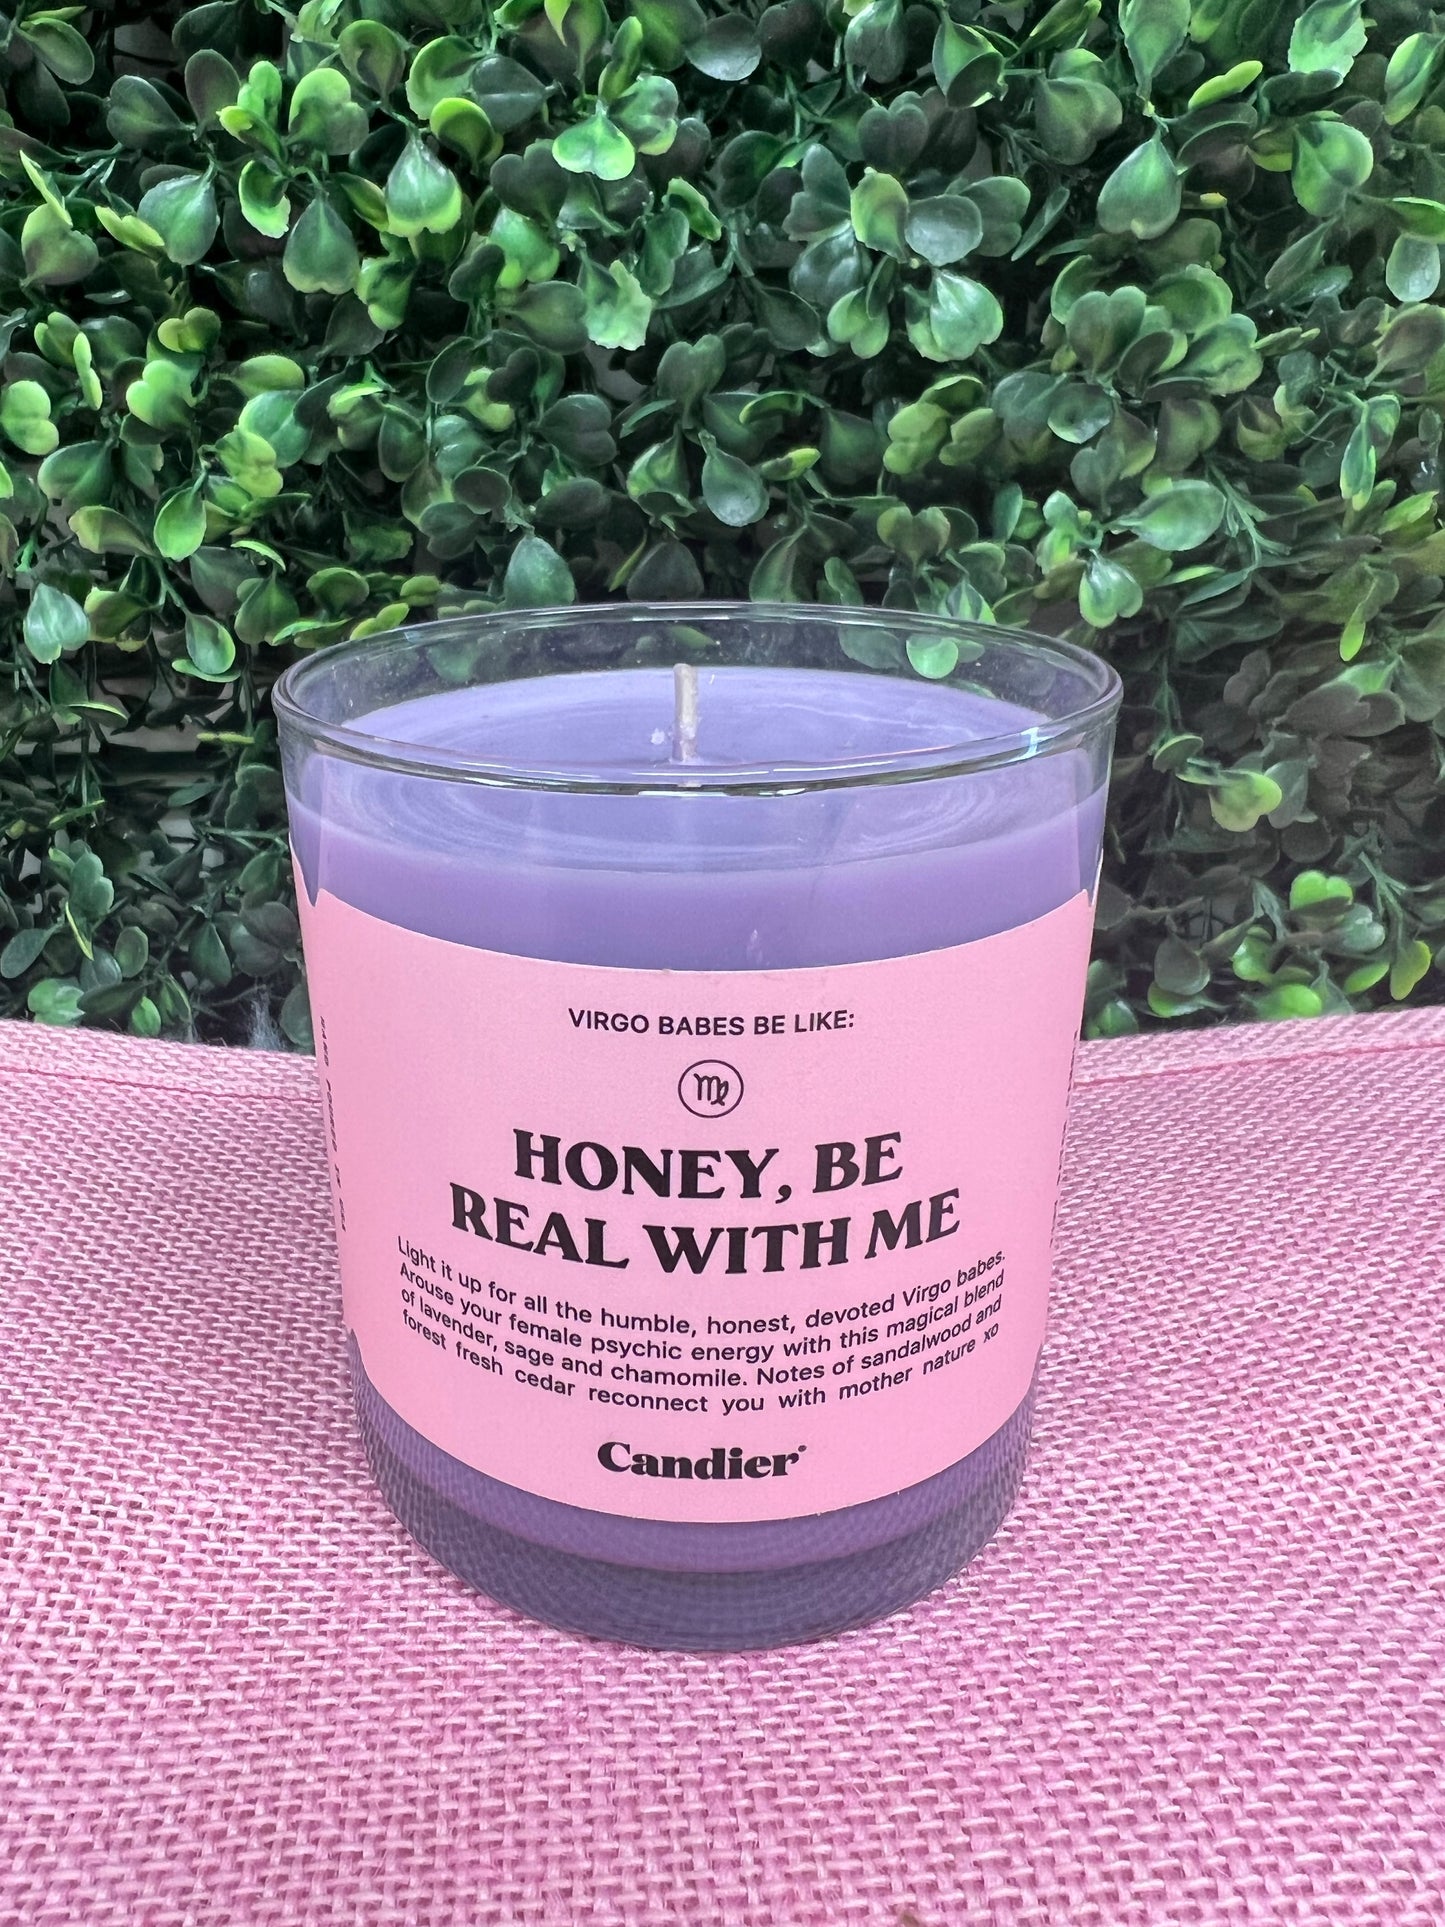 Candles - Ryan Porter Horoscope Virgo Babes Be Like: Honey, Be Real With Me Candle